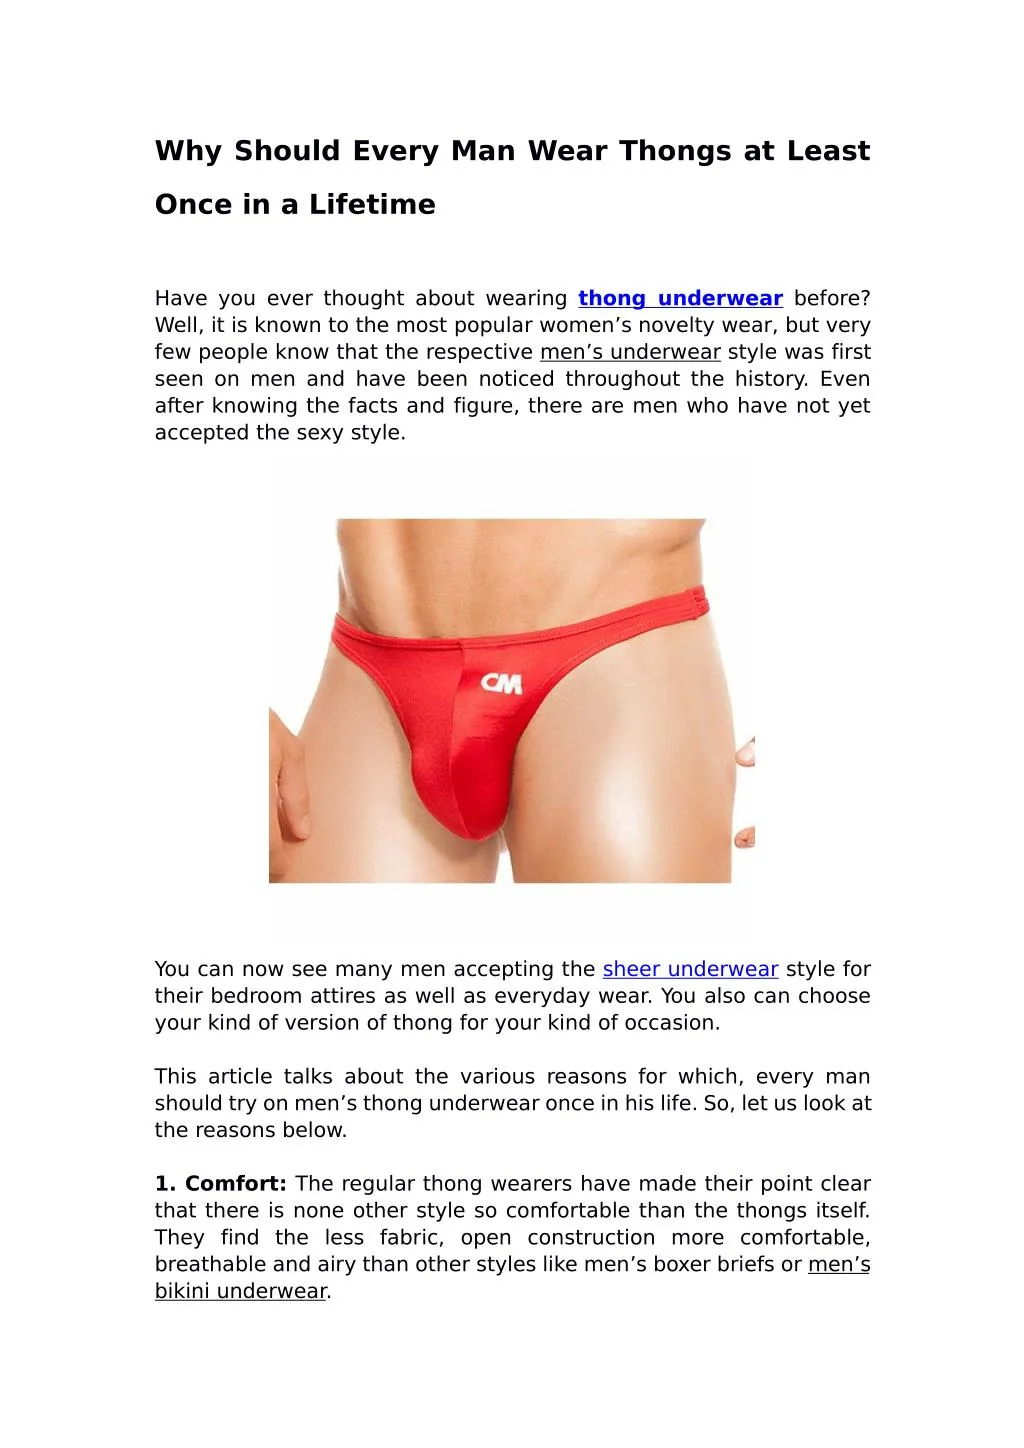 PPT - Why Should Every Man Wear Thongs At Least Once In A Lifetime  PowerPoint Presentation - ID:7354473